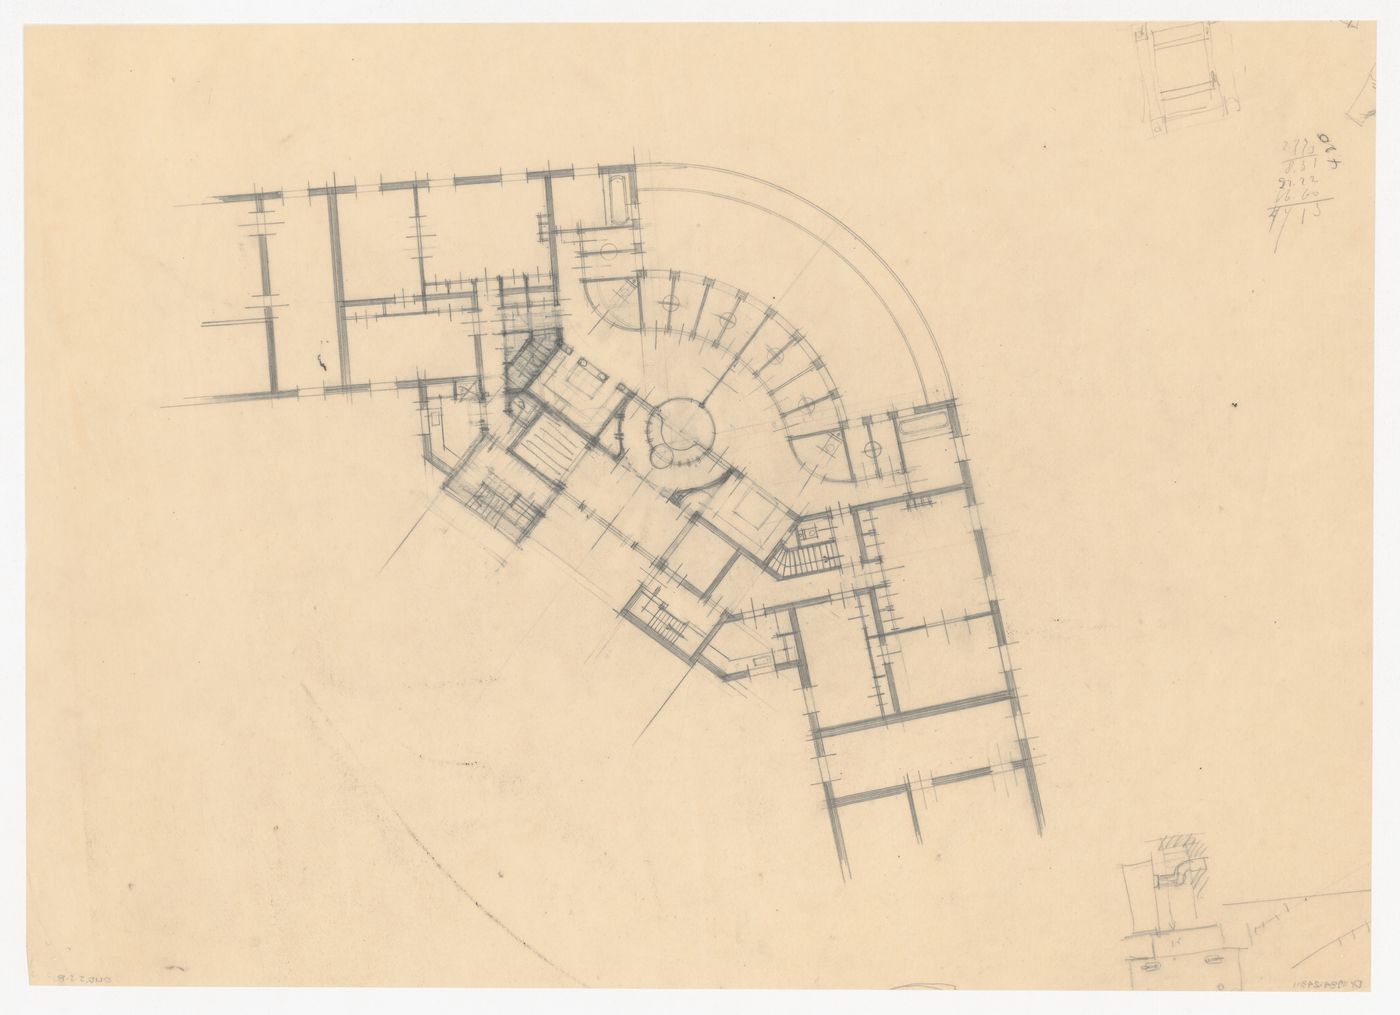 Plan for a city hall for the reconstruction of the Hofplein (city centre), Rotterdam, Netherlands